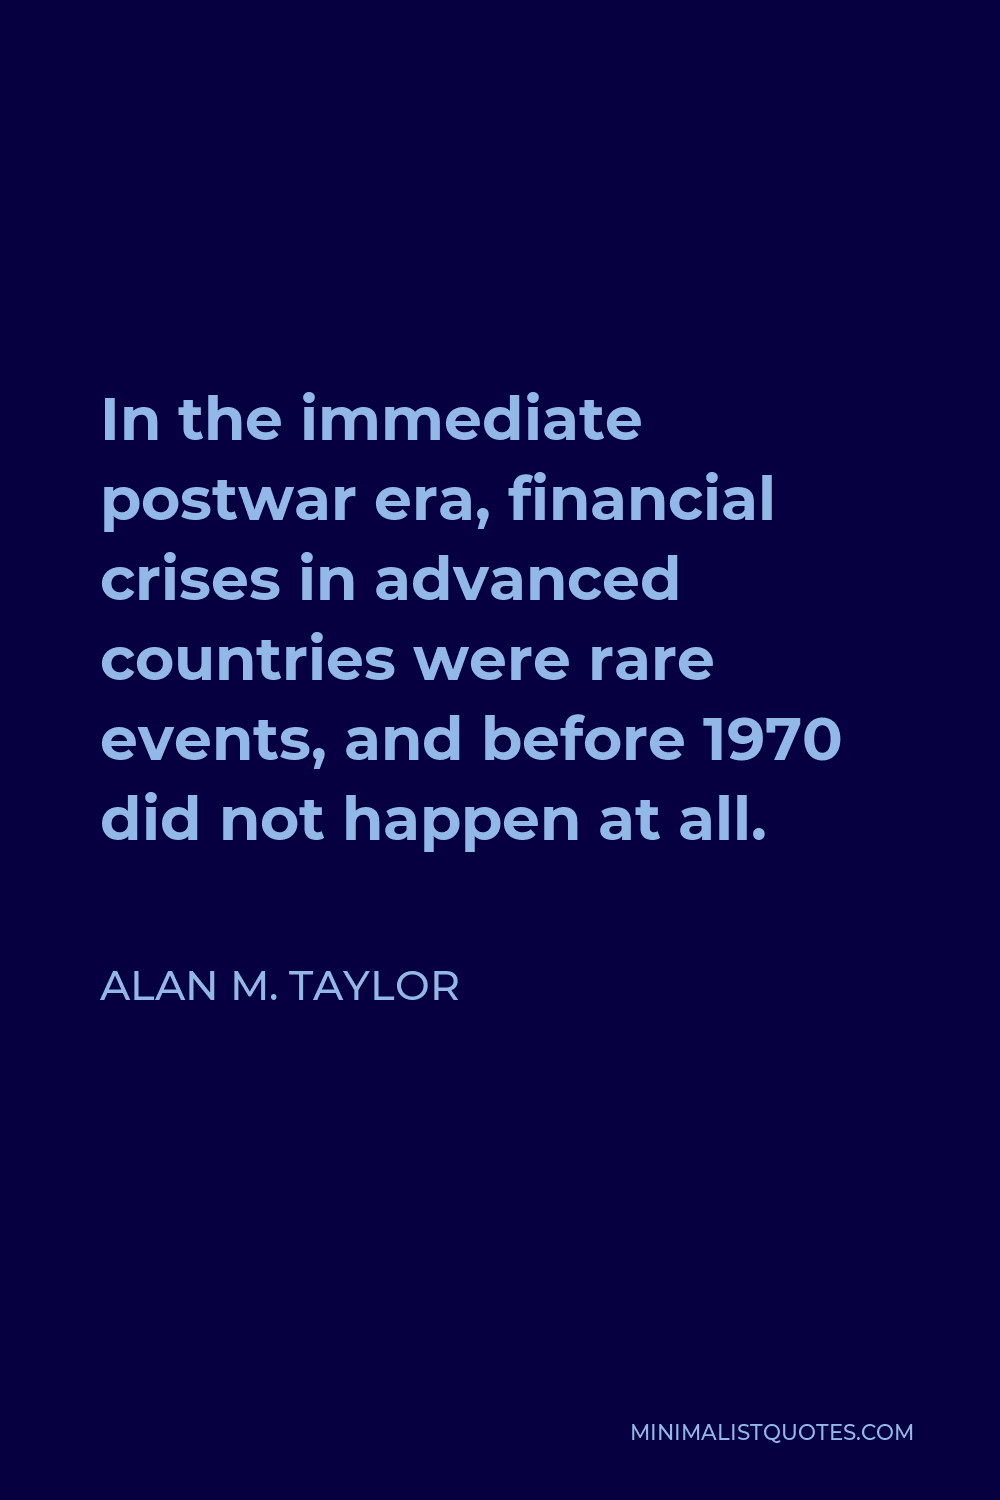 Alan M. Taylor Quote - In the immediate postwar era, financial crises in advanced countries were rare events, and before 1970 did not happen at all.